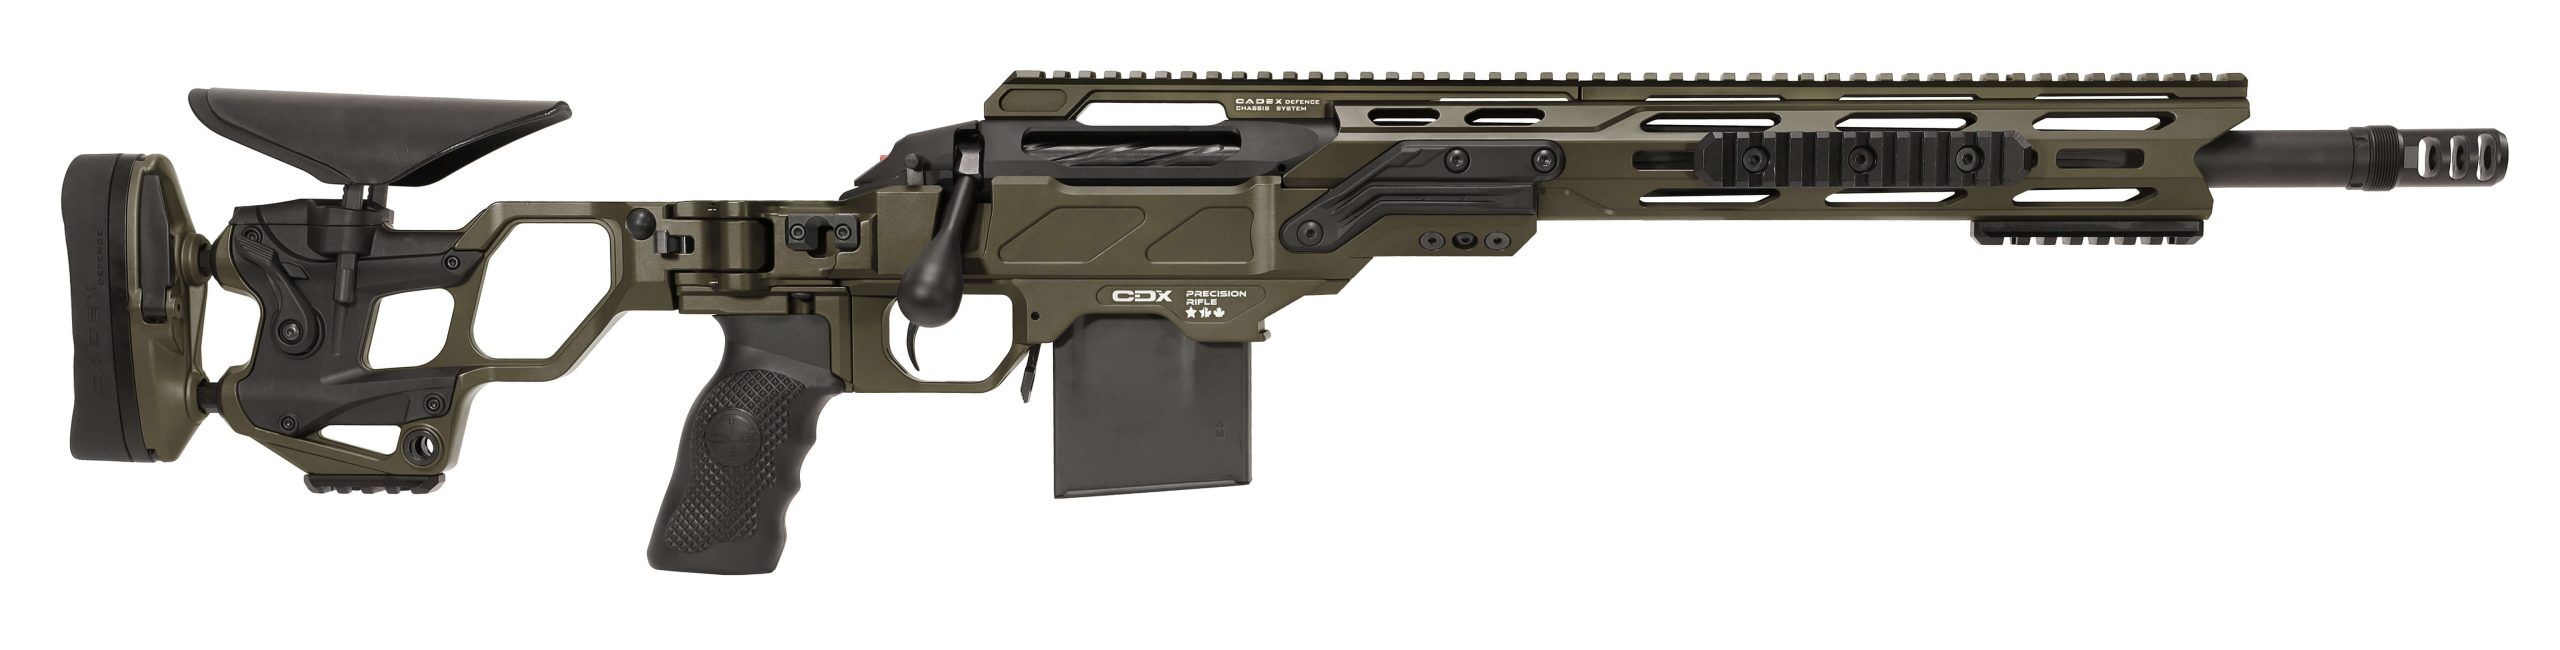 Cadex Defence – CDX-SS SEVEN S.T.A.R.S. COVERT